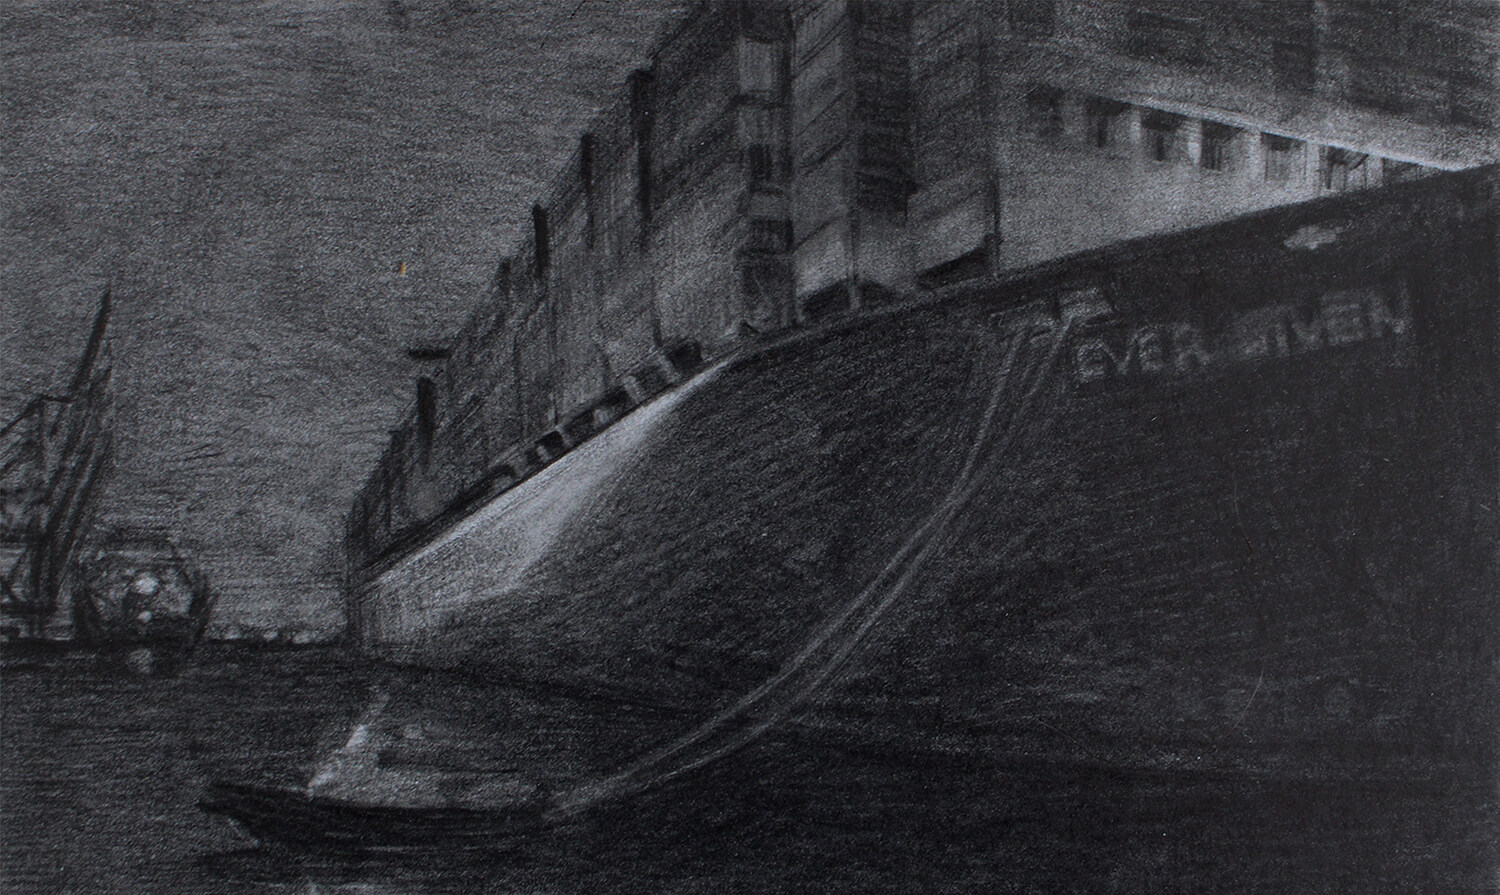 Martina Altschäfer, The Netherlands, Rotterdam, Incoming Ever Given (60), 2021, graphite on cardboard, 10 x 16 cm